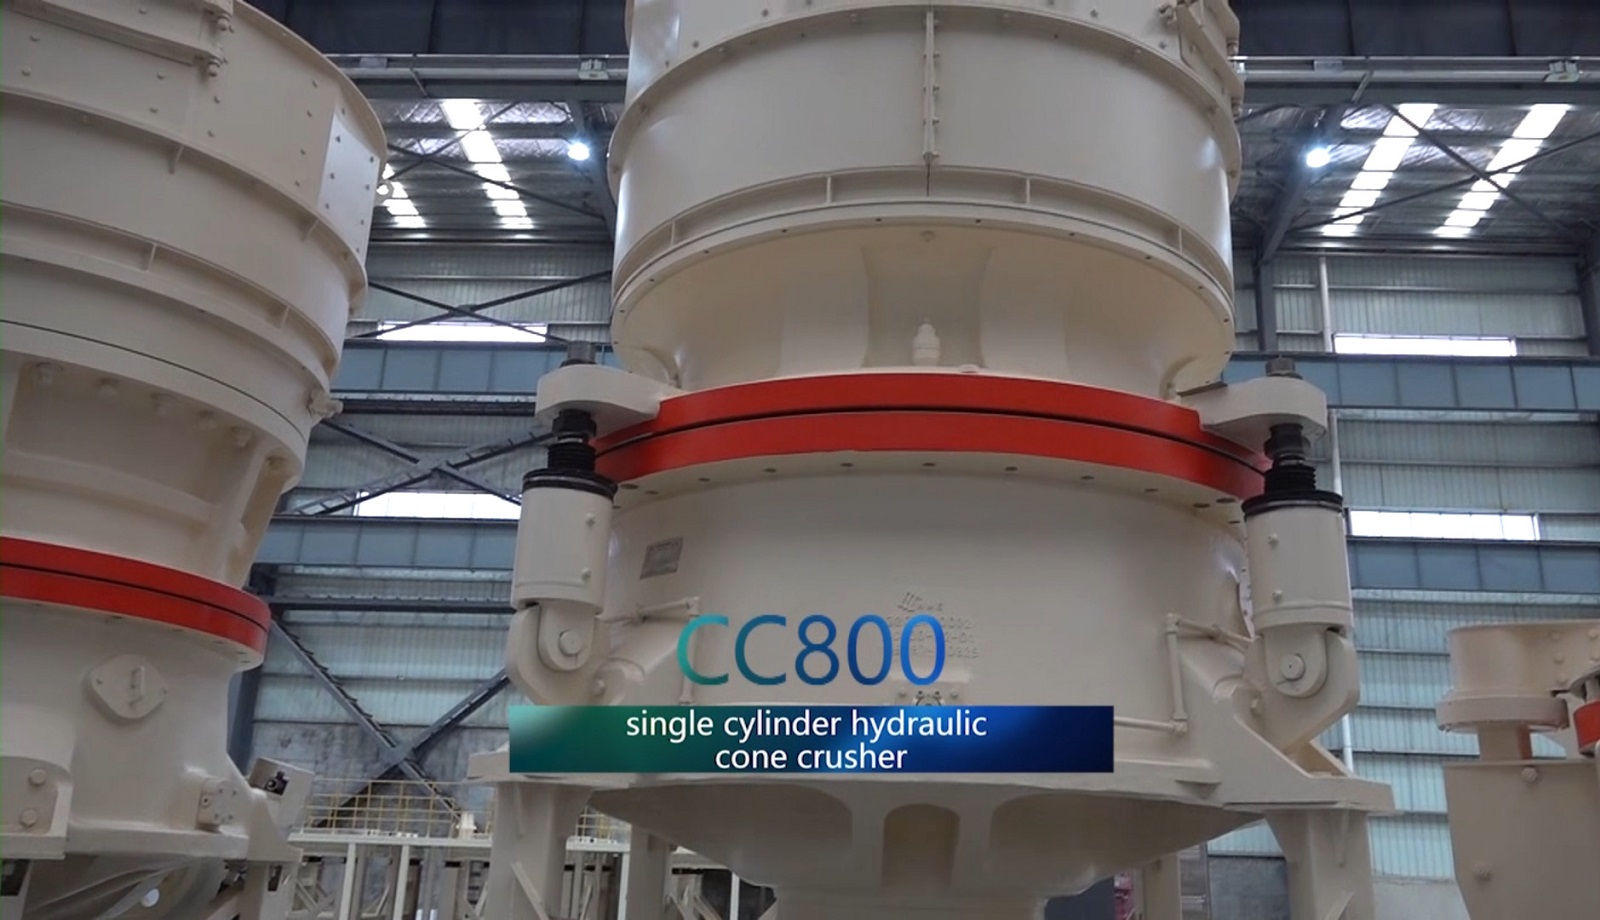 Introduction of CC800 Cone Crusher